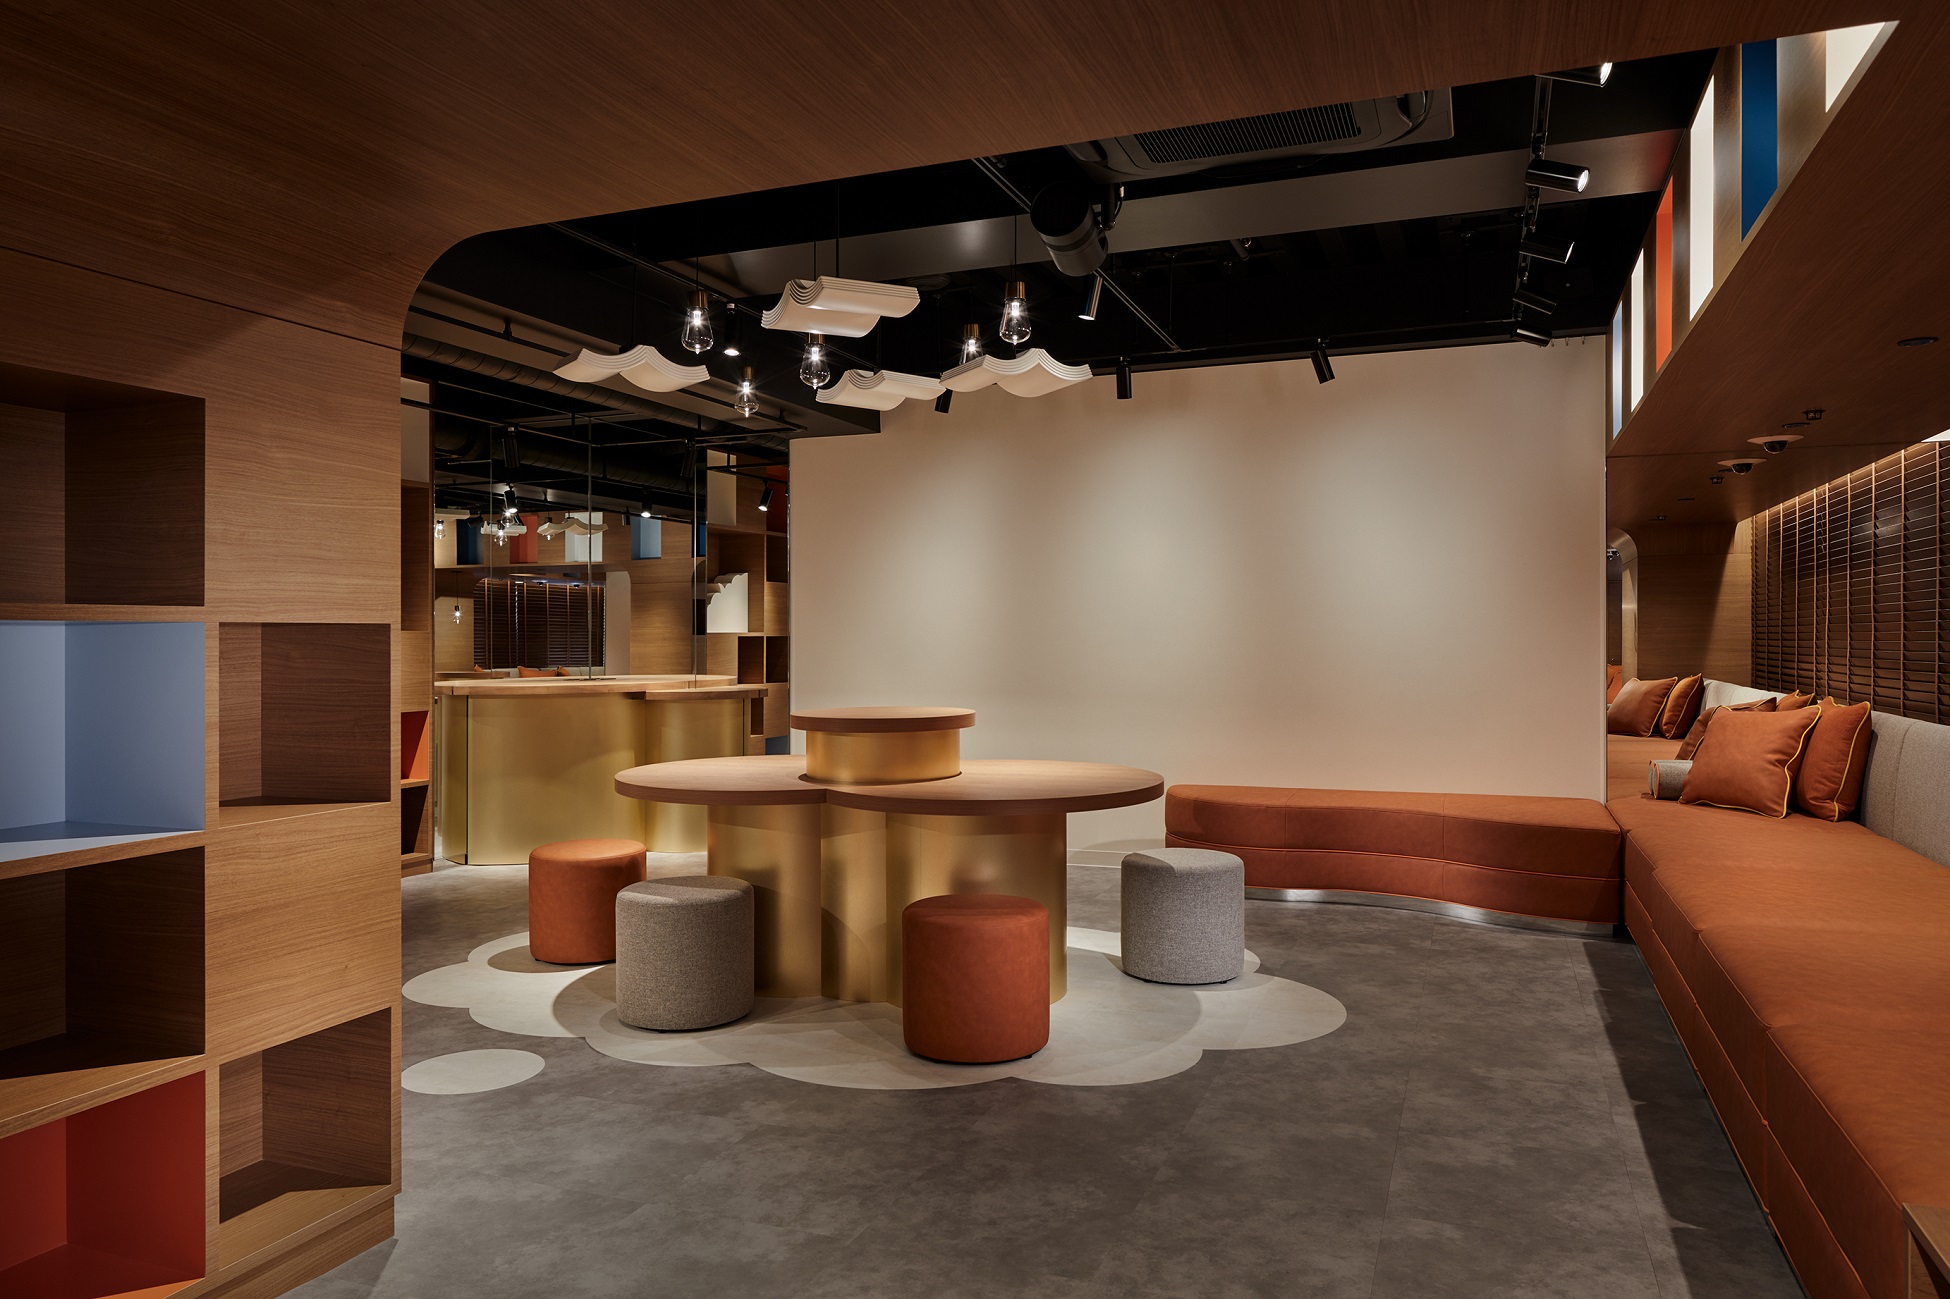 A Floor That Can Be Enjoyed by Overseas Fans Who Love Japanese Subculture – “IKEPRI 25” the Concept Floor, Has Opened in April 6th, 2019